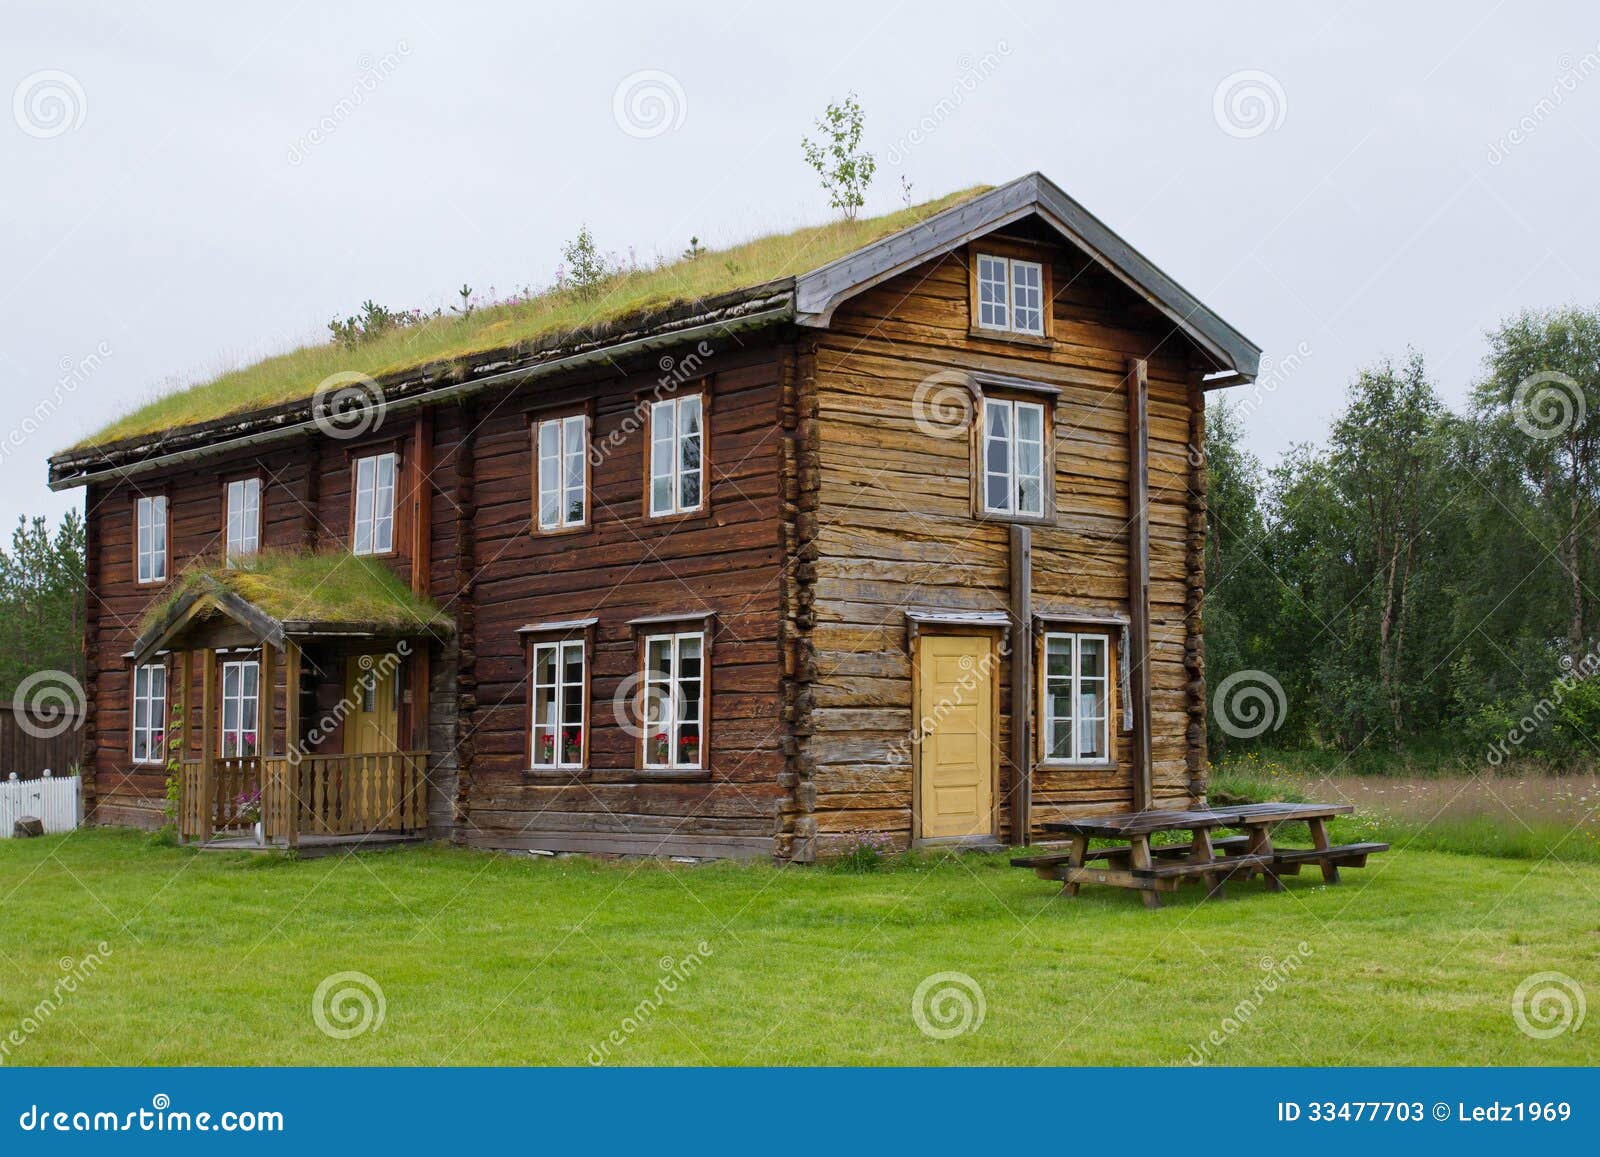 A big old wooden house stock image. Image of north, structure - 33477703